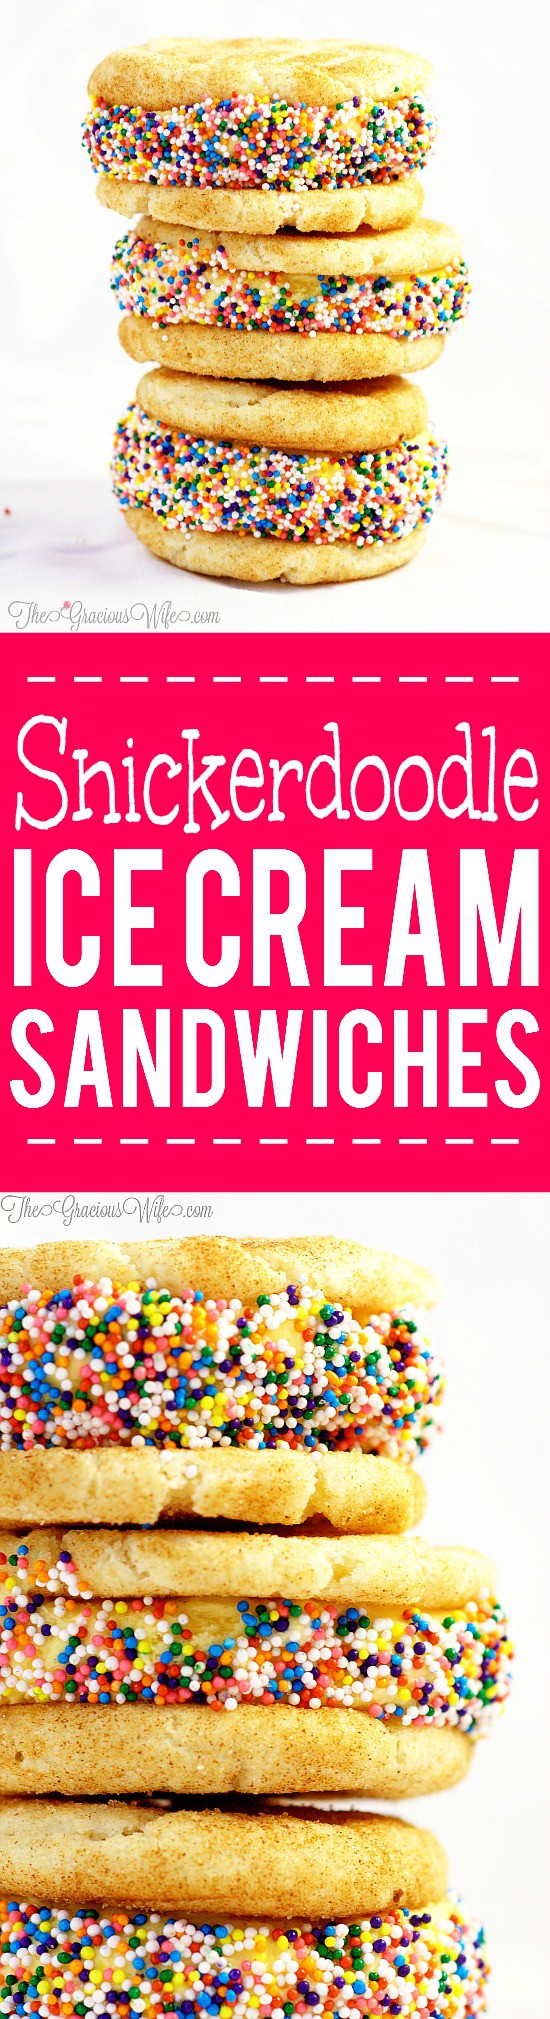 Snickerdoodle Ice Cream Sandwich Recipe- a fun and easy to make summer dessert recipe idea for kids! Creamy ice cream sandwiched between two cinnamon-sugar snickerdoodles, finished off with fun, colorful sprinkles! Perfect summer treat!